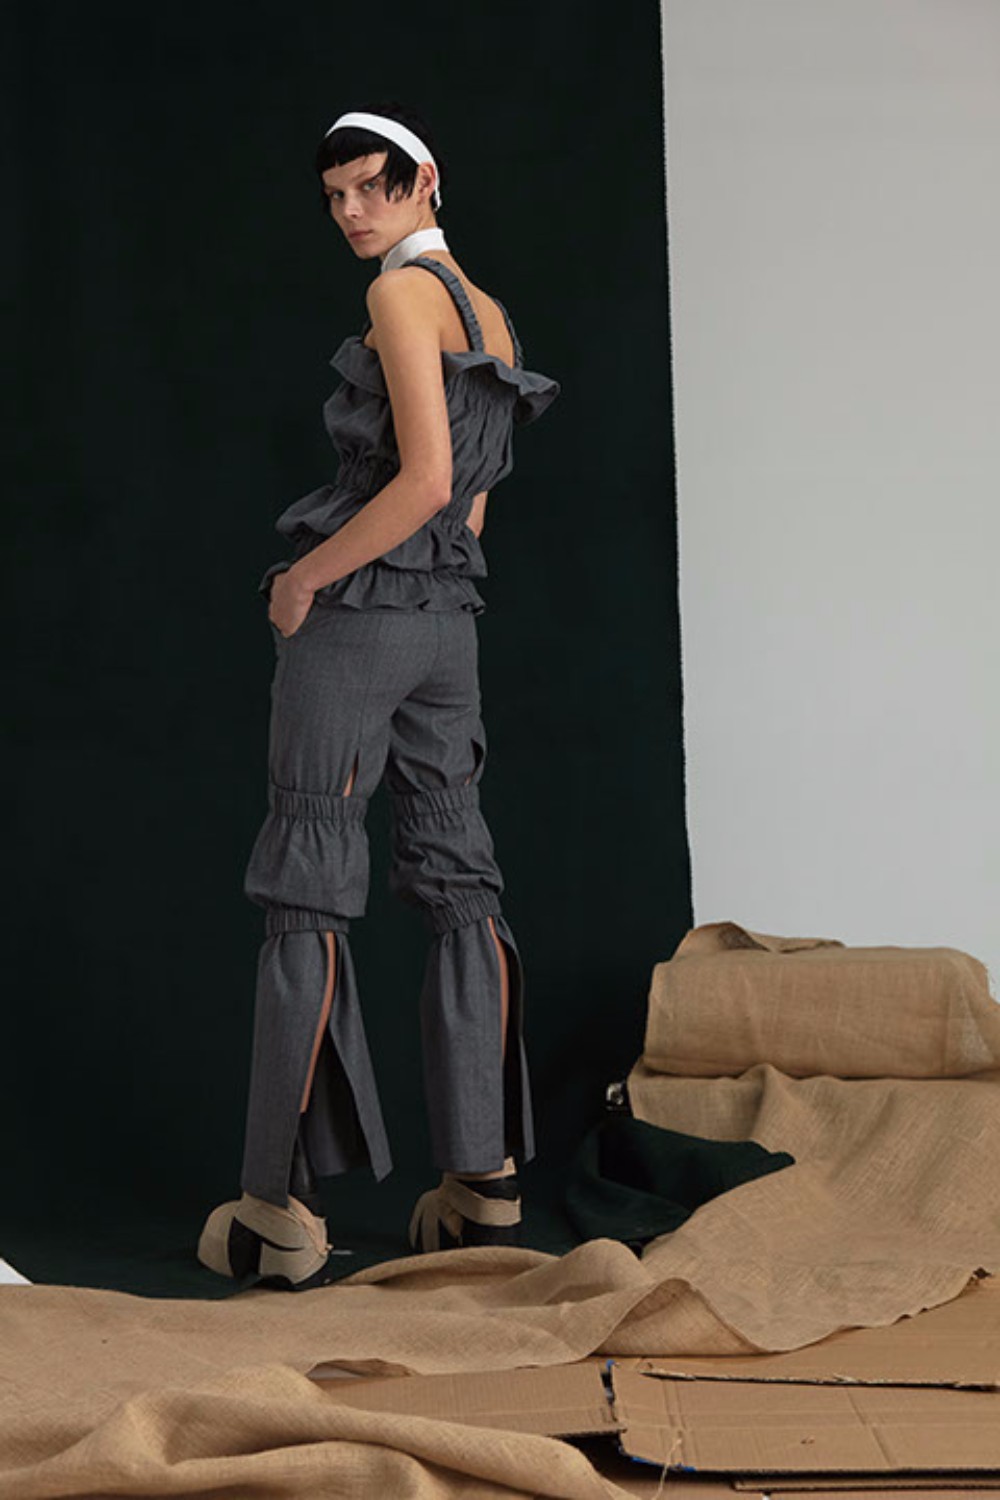 New York label Yajun makes its debut, offering minimalism with a twist